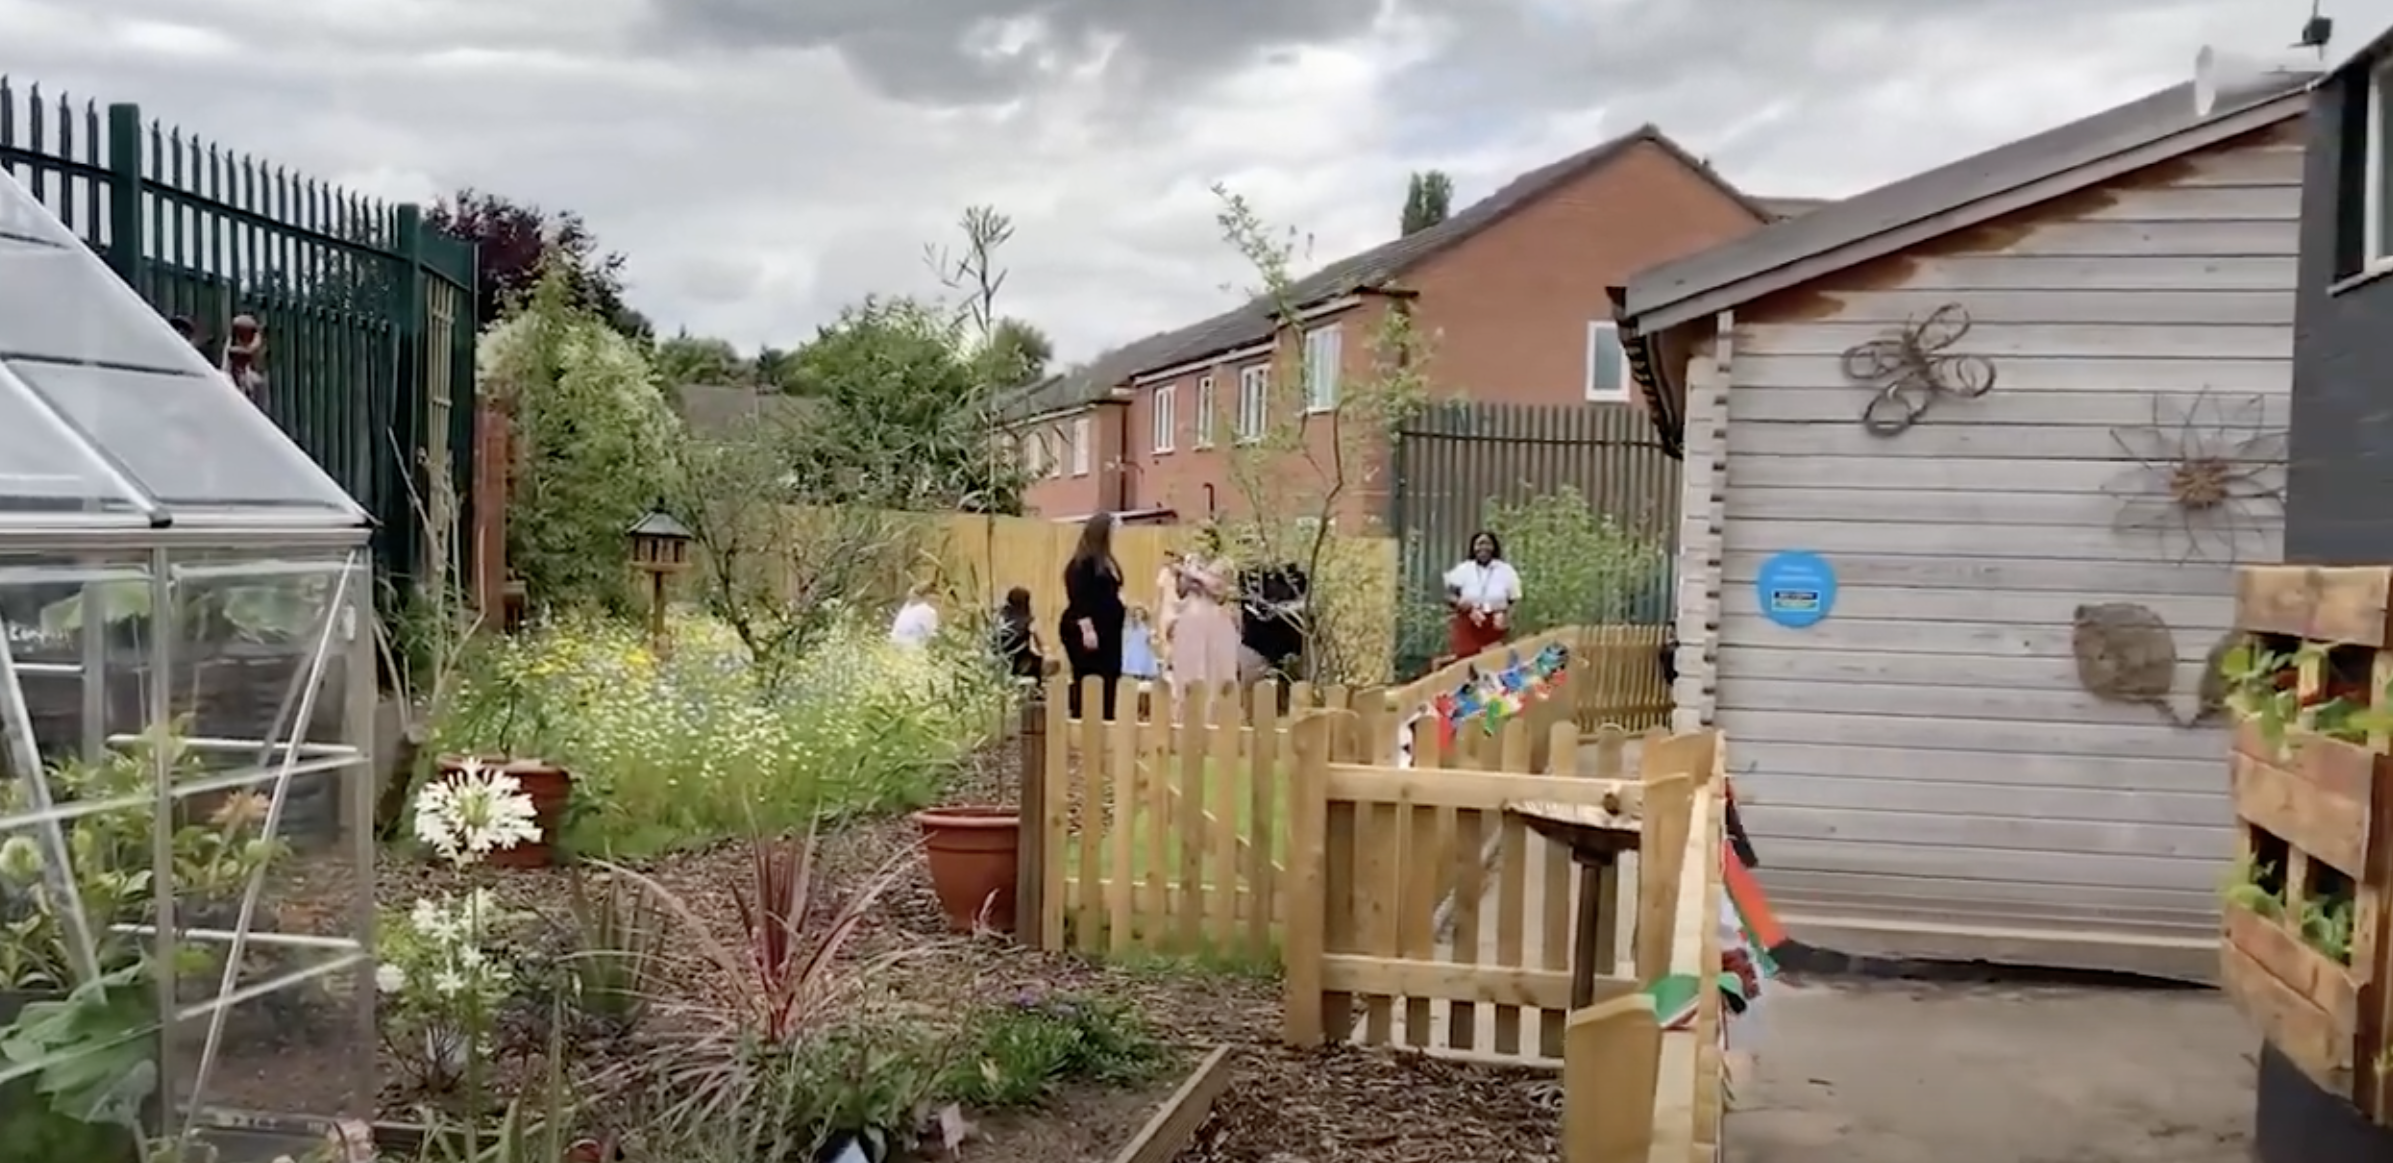 The garden created for pupils at Kings Rise Academy